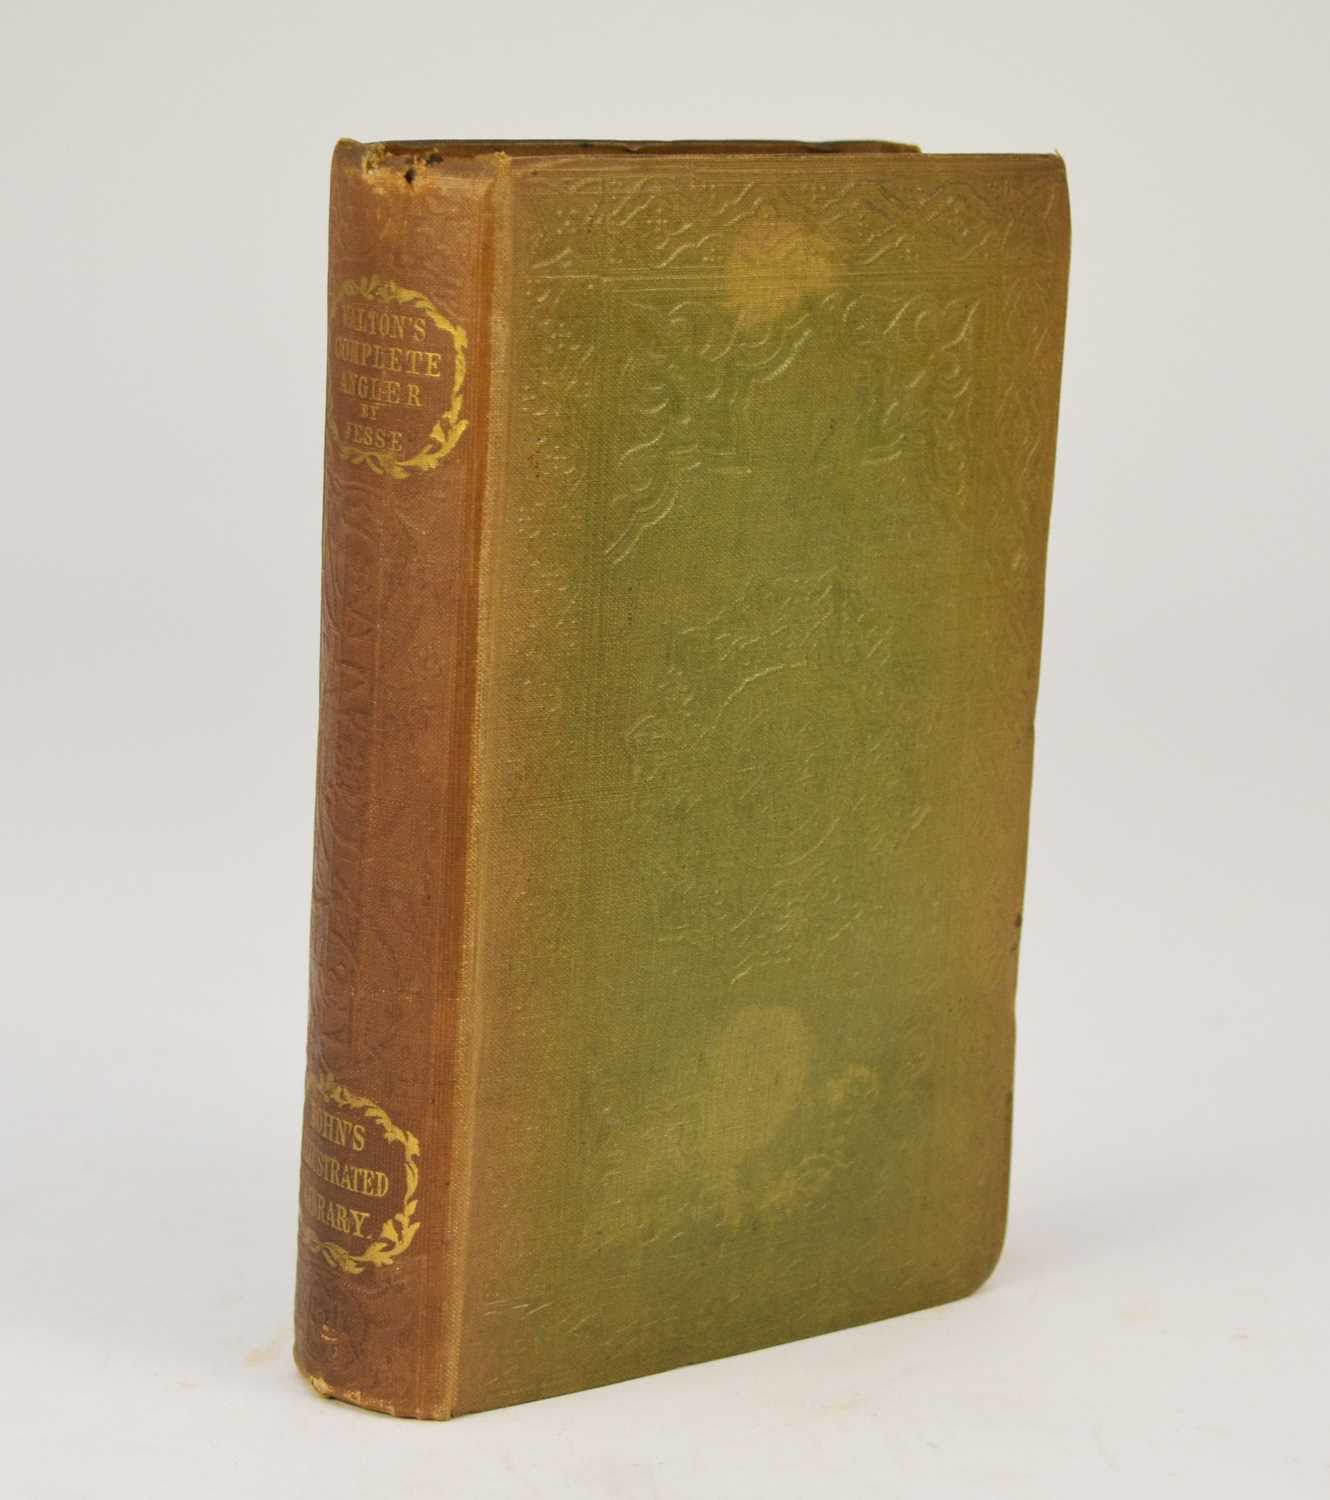 Lot 46 - WALTON, Isaac, The Complete Angler. Henry G Bohn, 1856. Edited by Edward Jesse. With portrait frontis and 203 wood engravings in the text. Original green blind-stamped cloth gilt